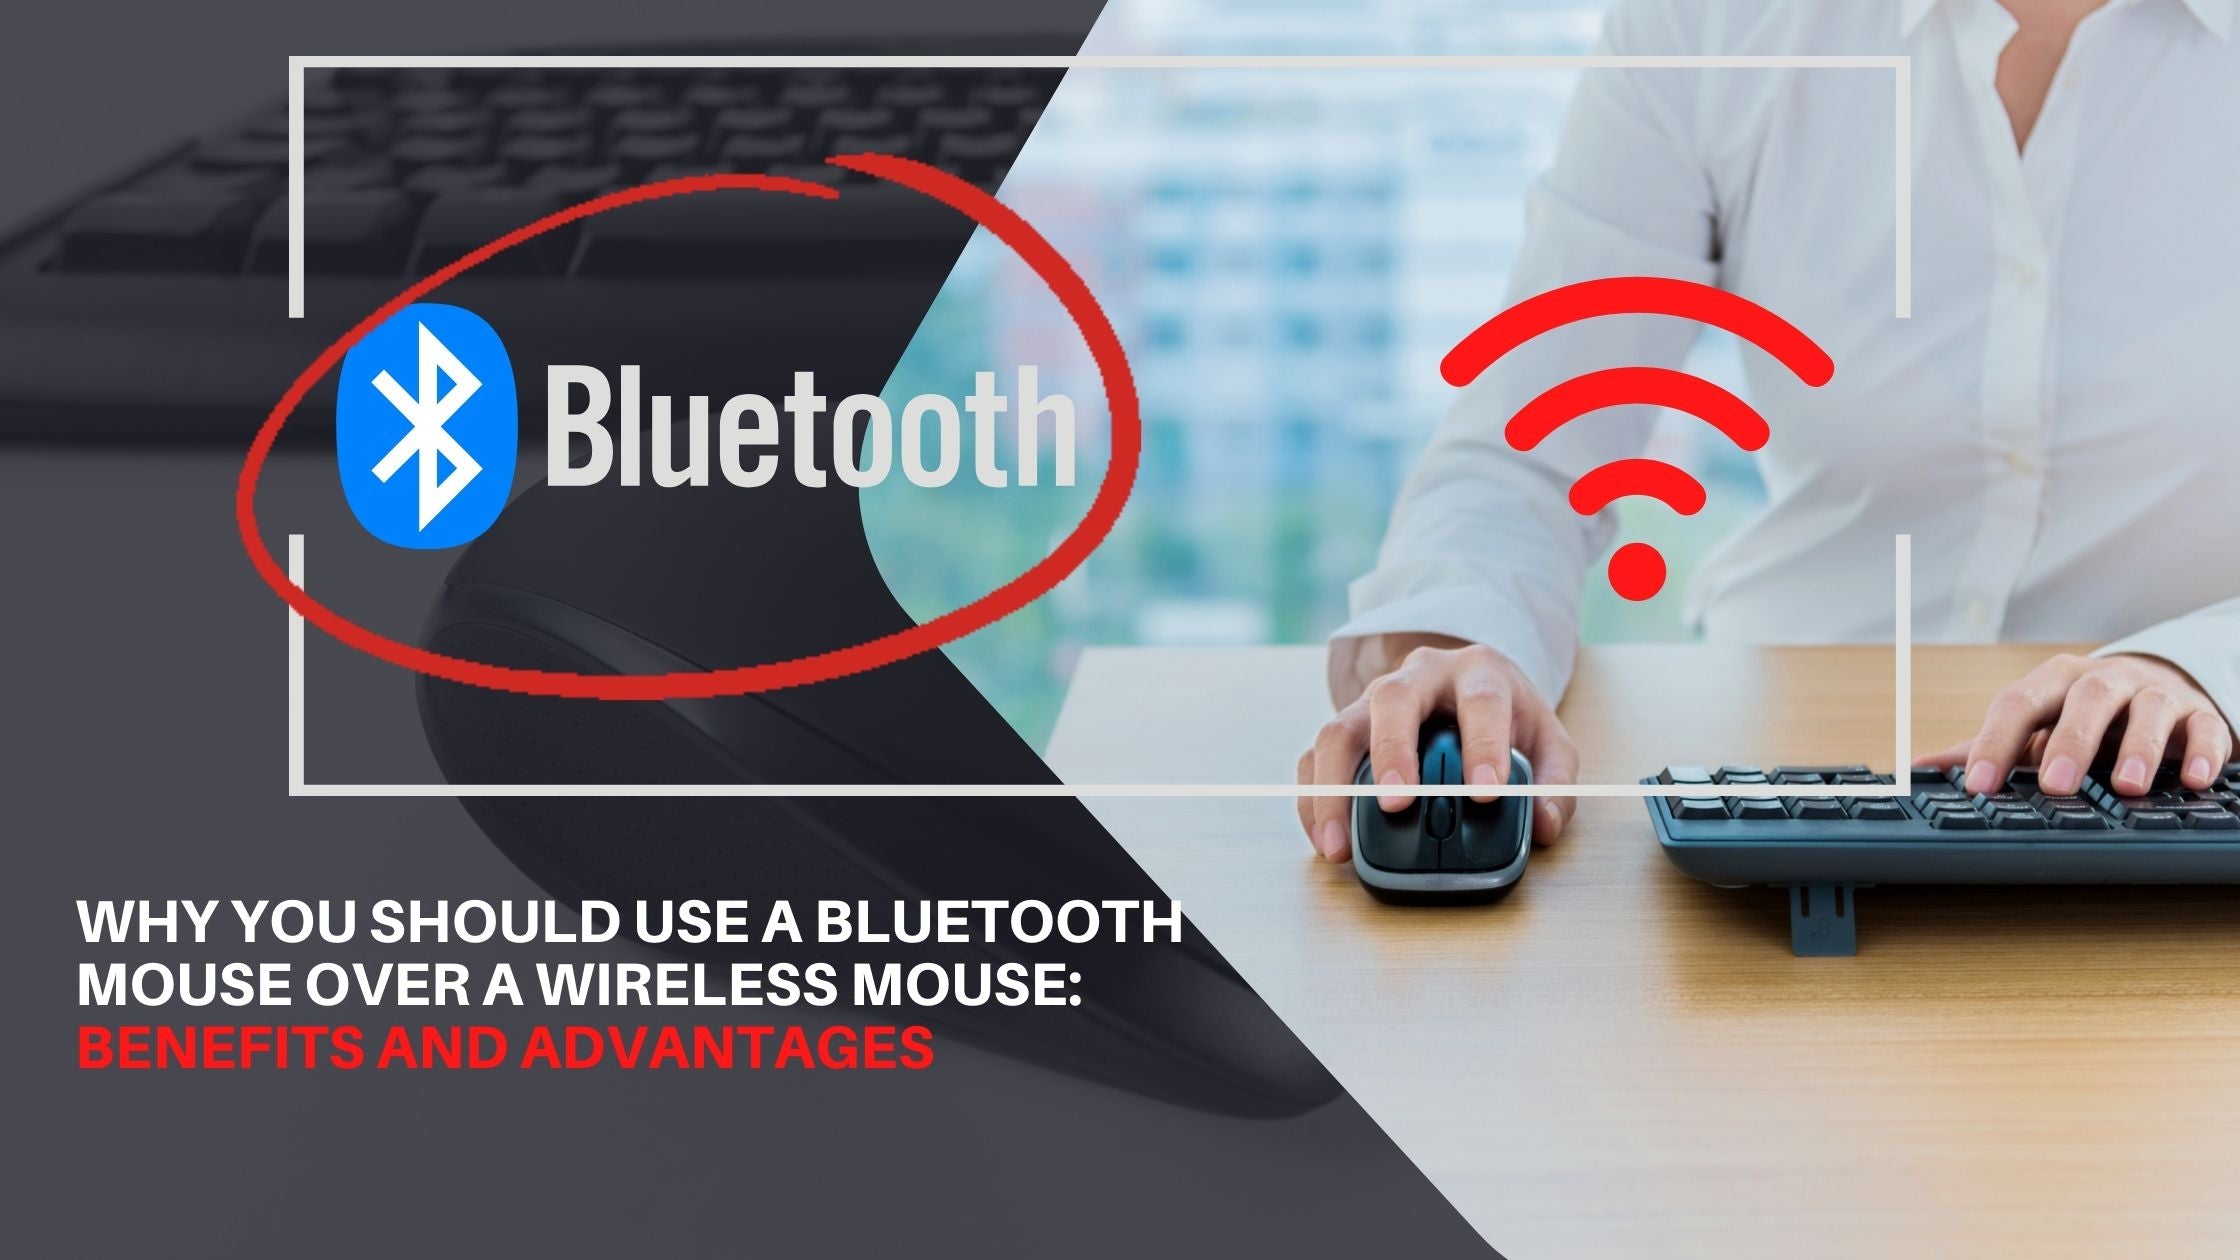 What is Bluetooth and how do I use it?